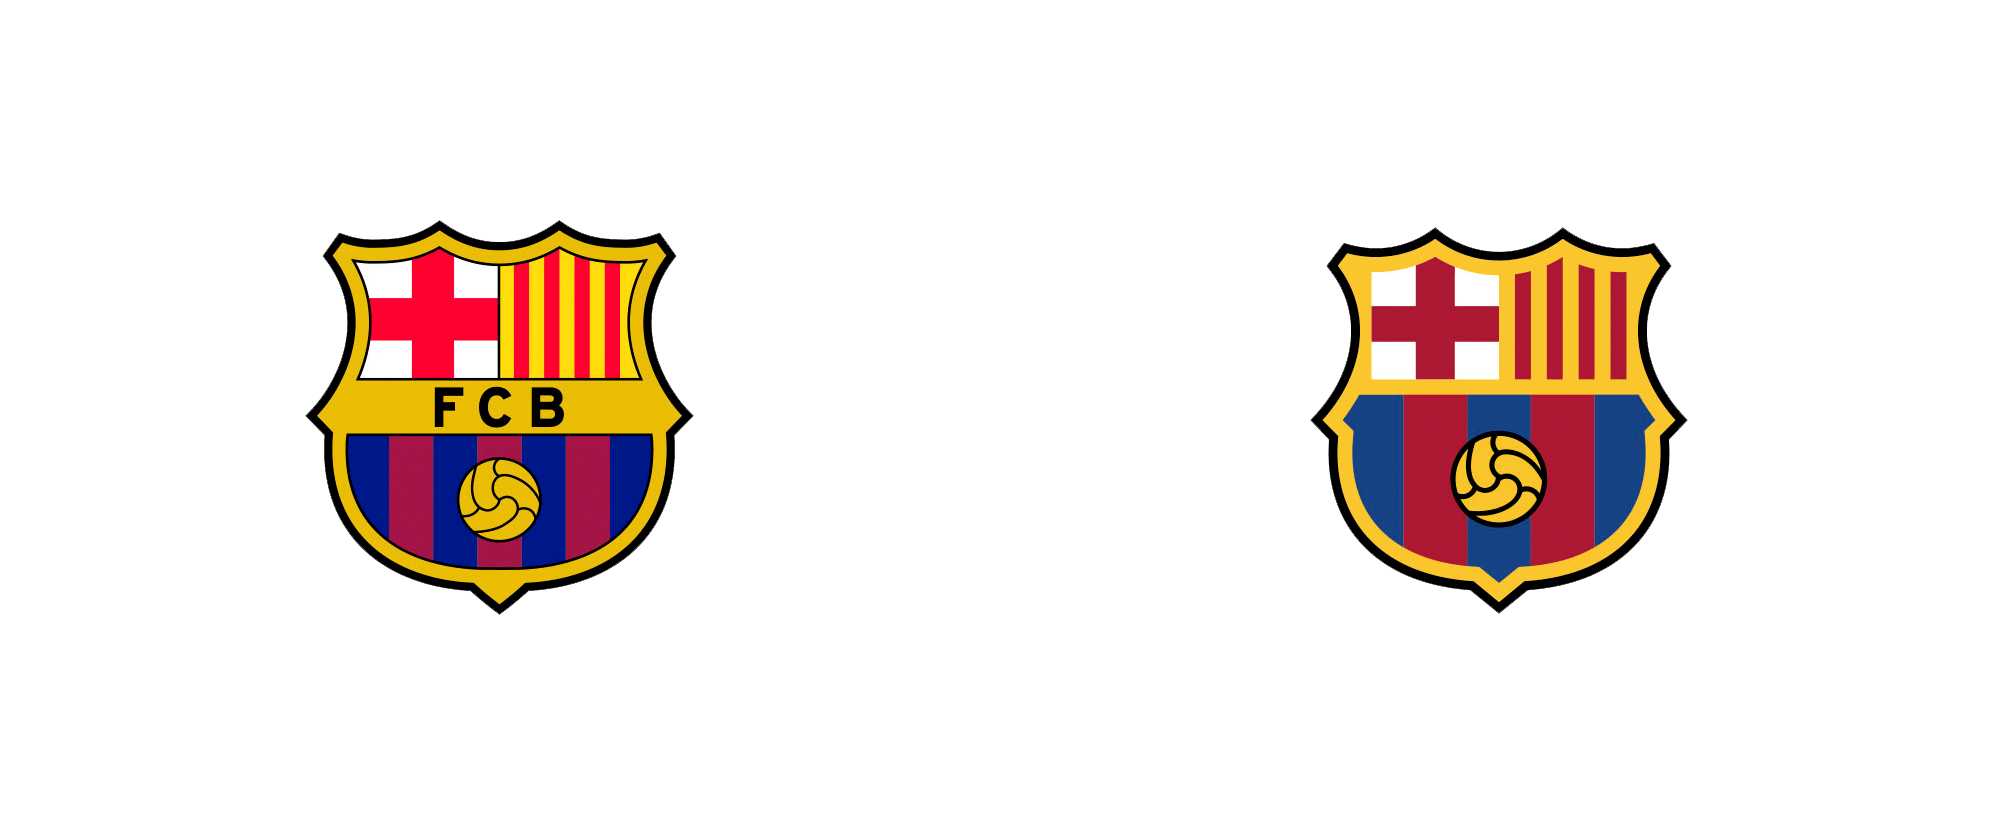 Barcilona Logo - Brand New: New Crest and Identity for FC Barcelona by Summa